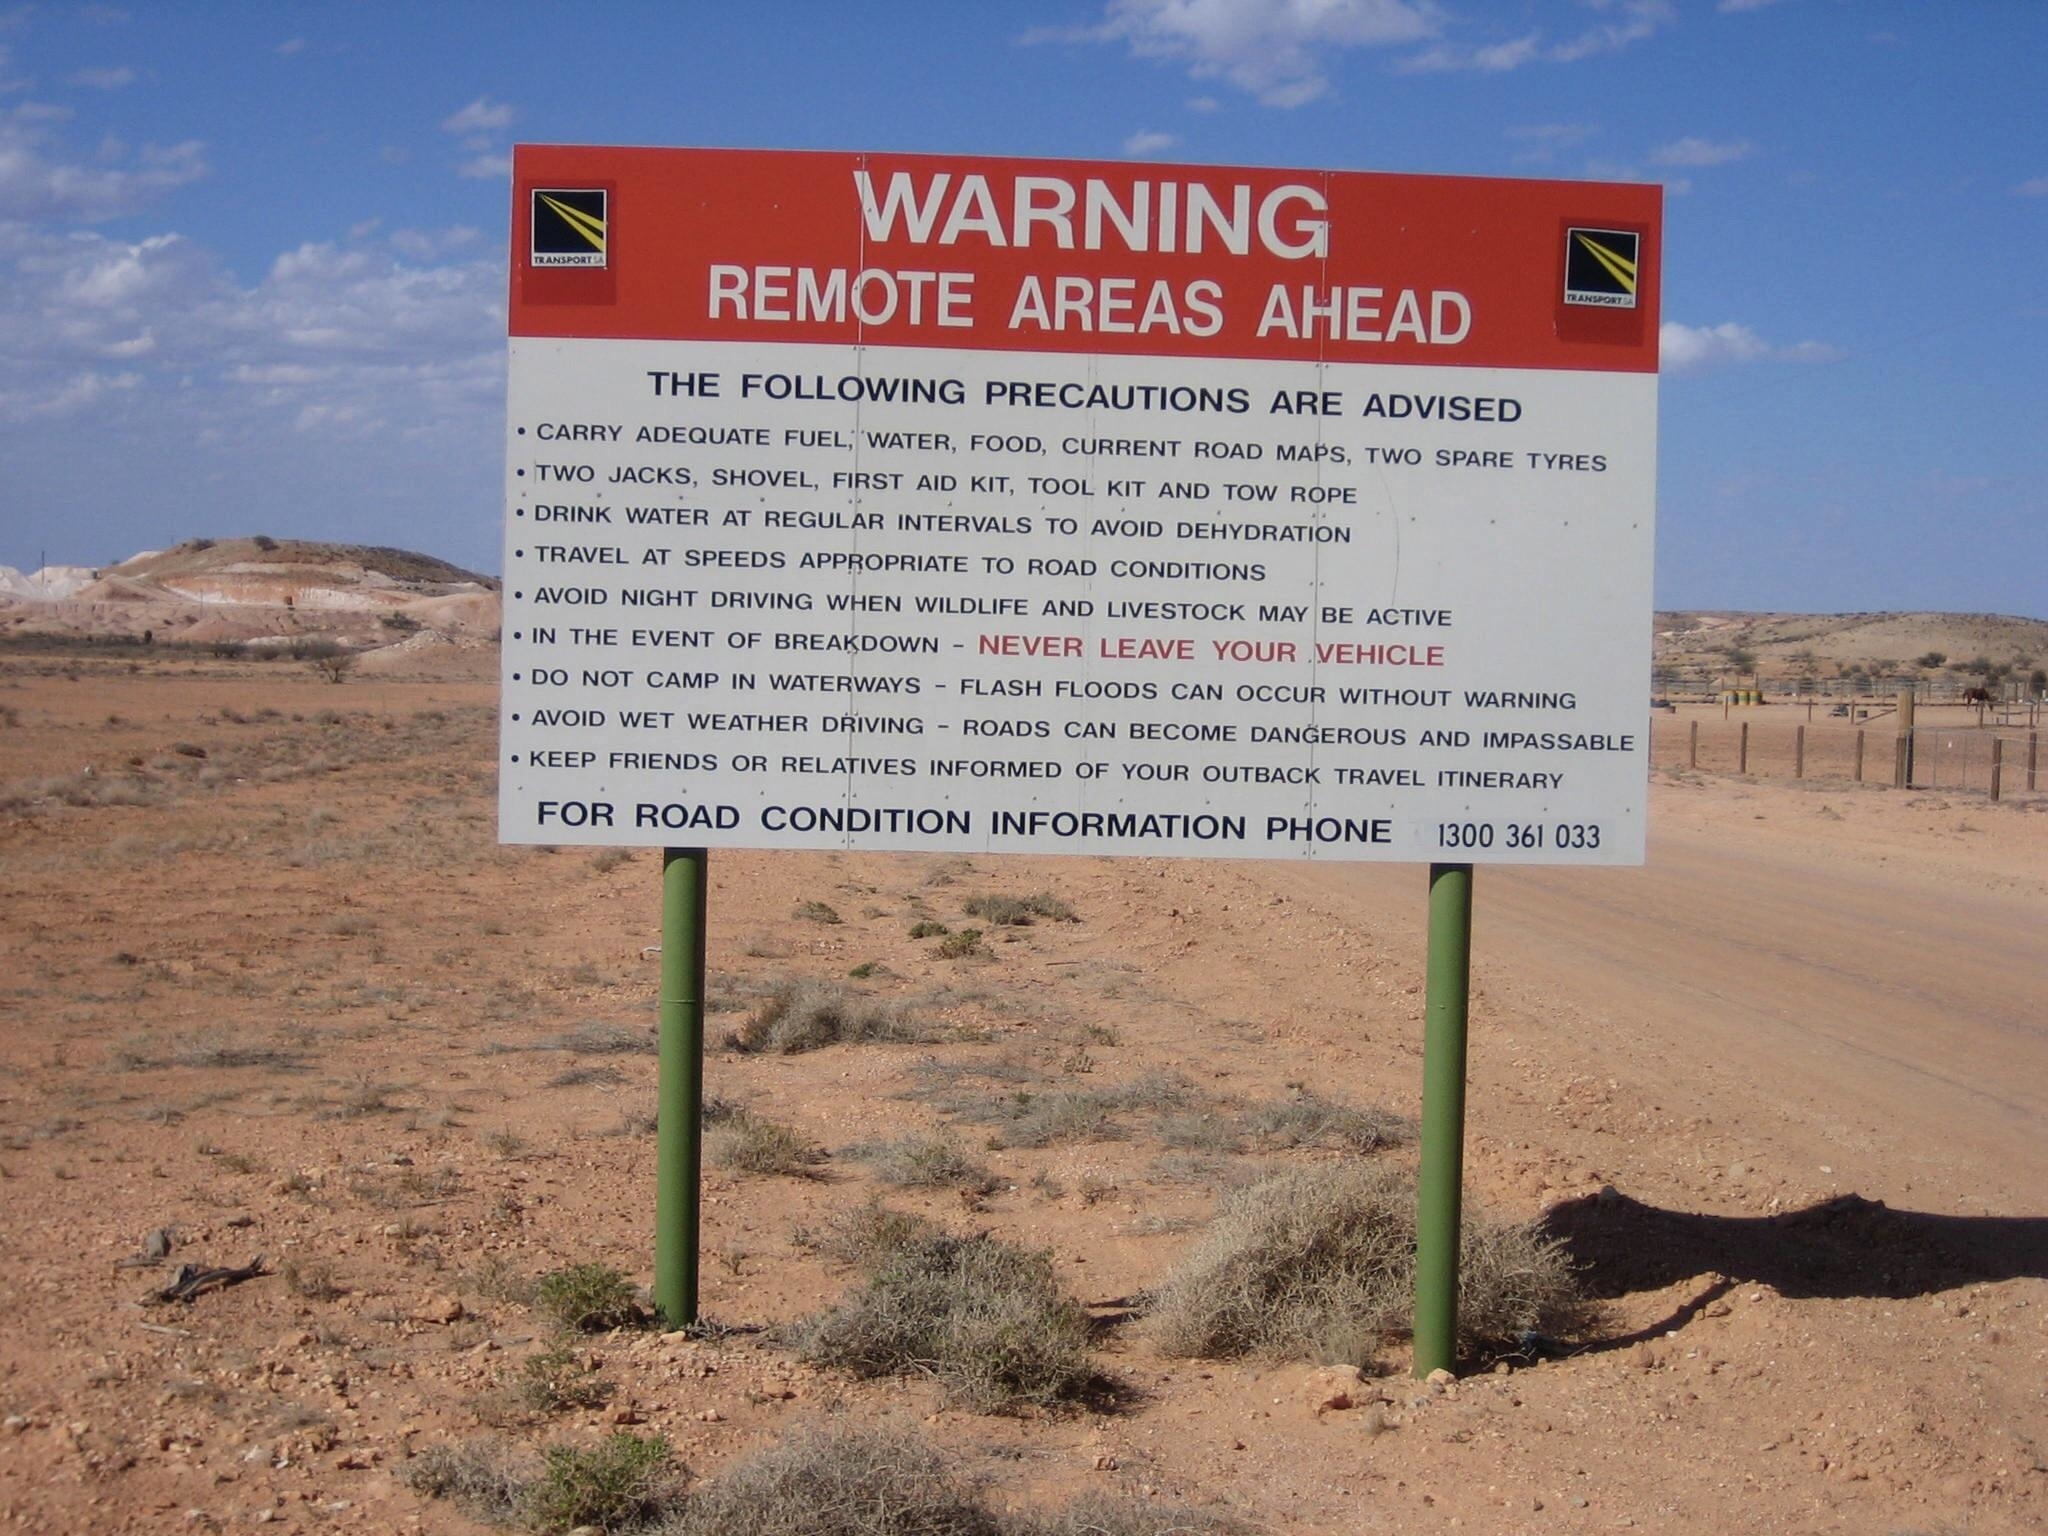 &quot;Remote Areas Ahead&quot; sign in an arid area, with warnings to &quot;carry adequate fuel, water, food, current road maps, and two spare tyres&quot; and &quot;keep friends or relatives informed of your outback travel itinerary,&quot; among others